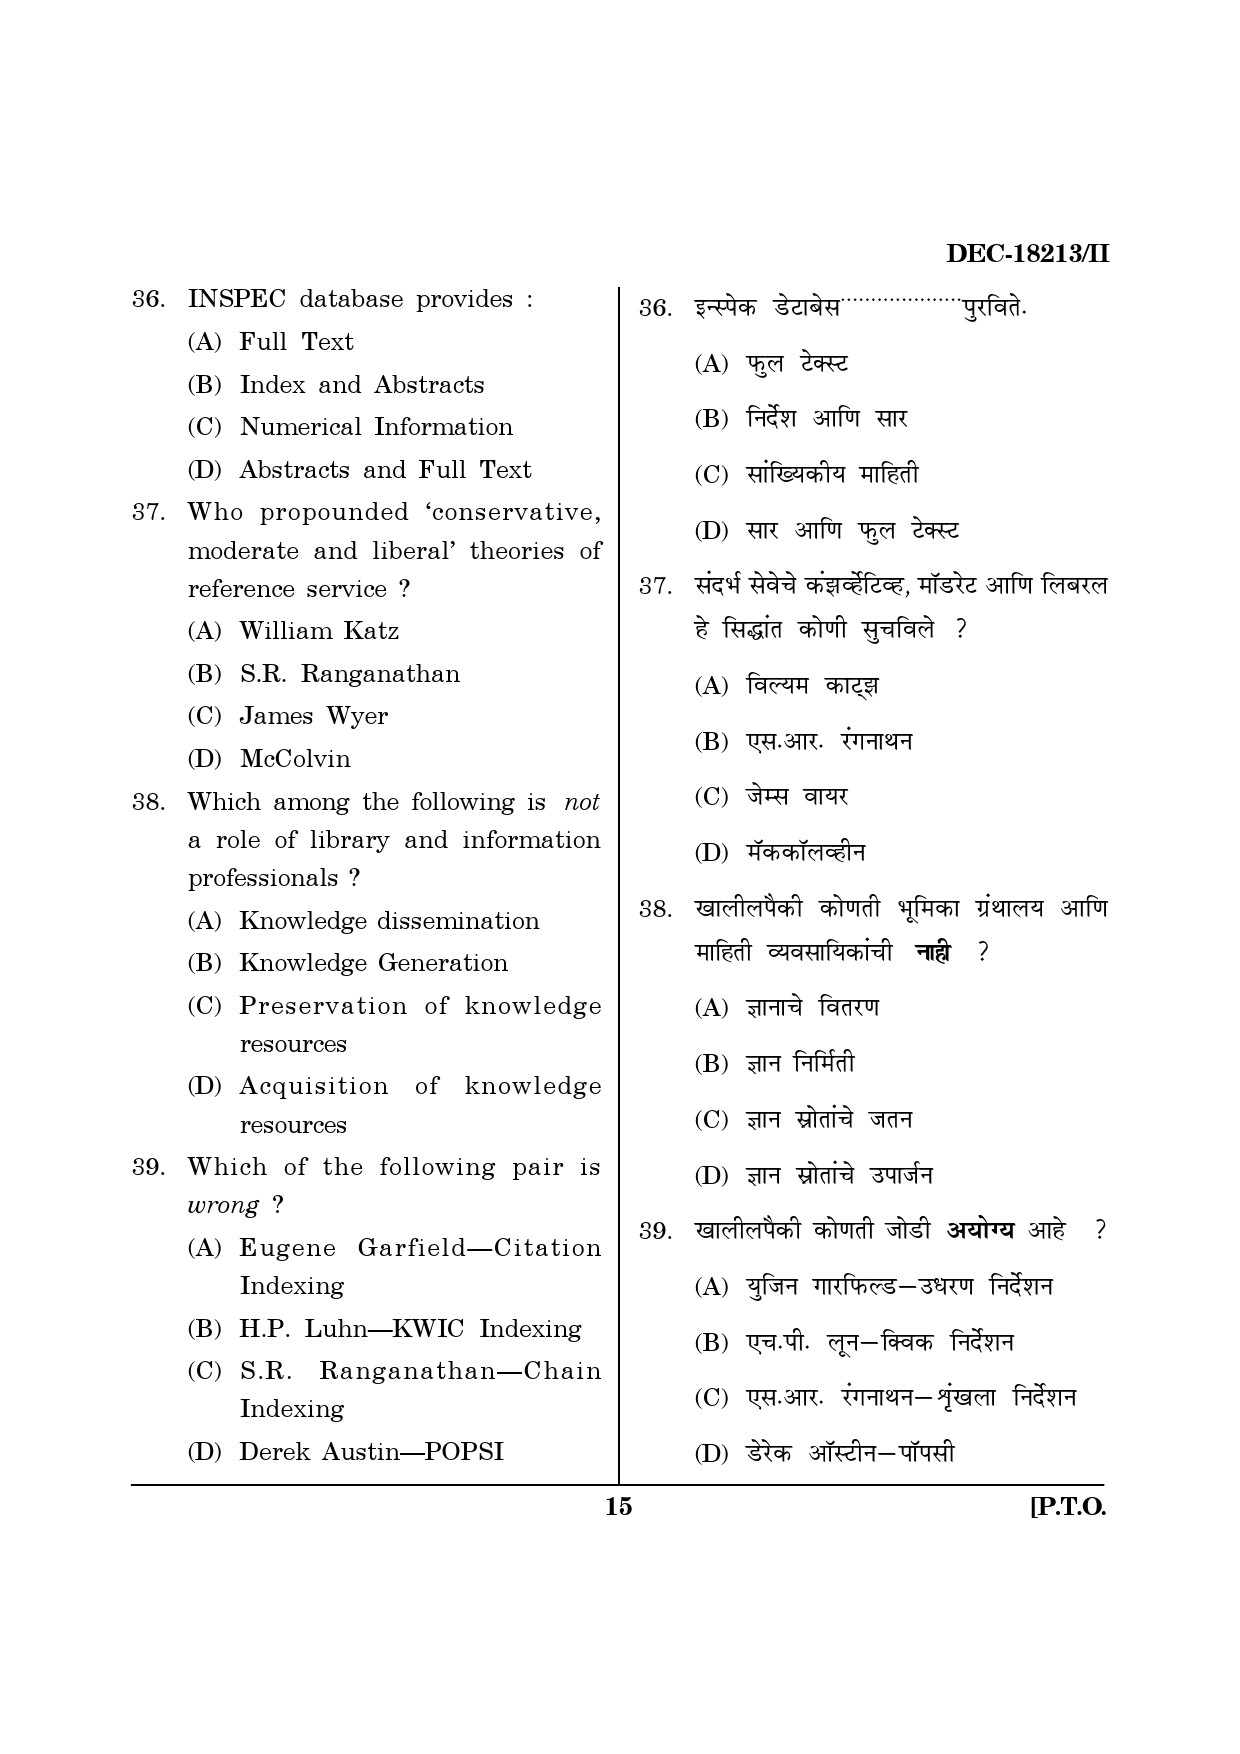 Maharashtra SET Library Information Science Question Paper II December 2013 14